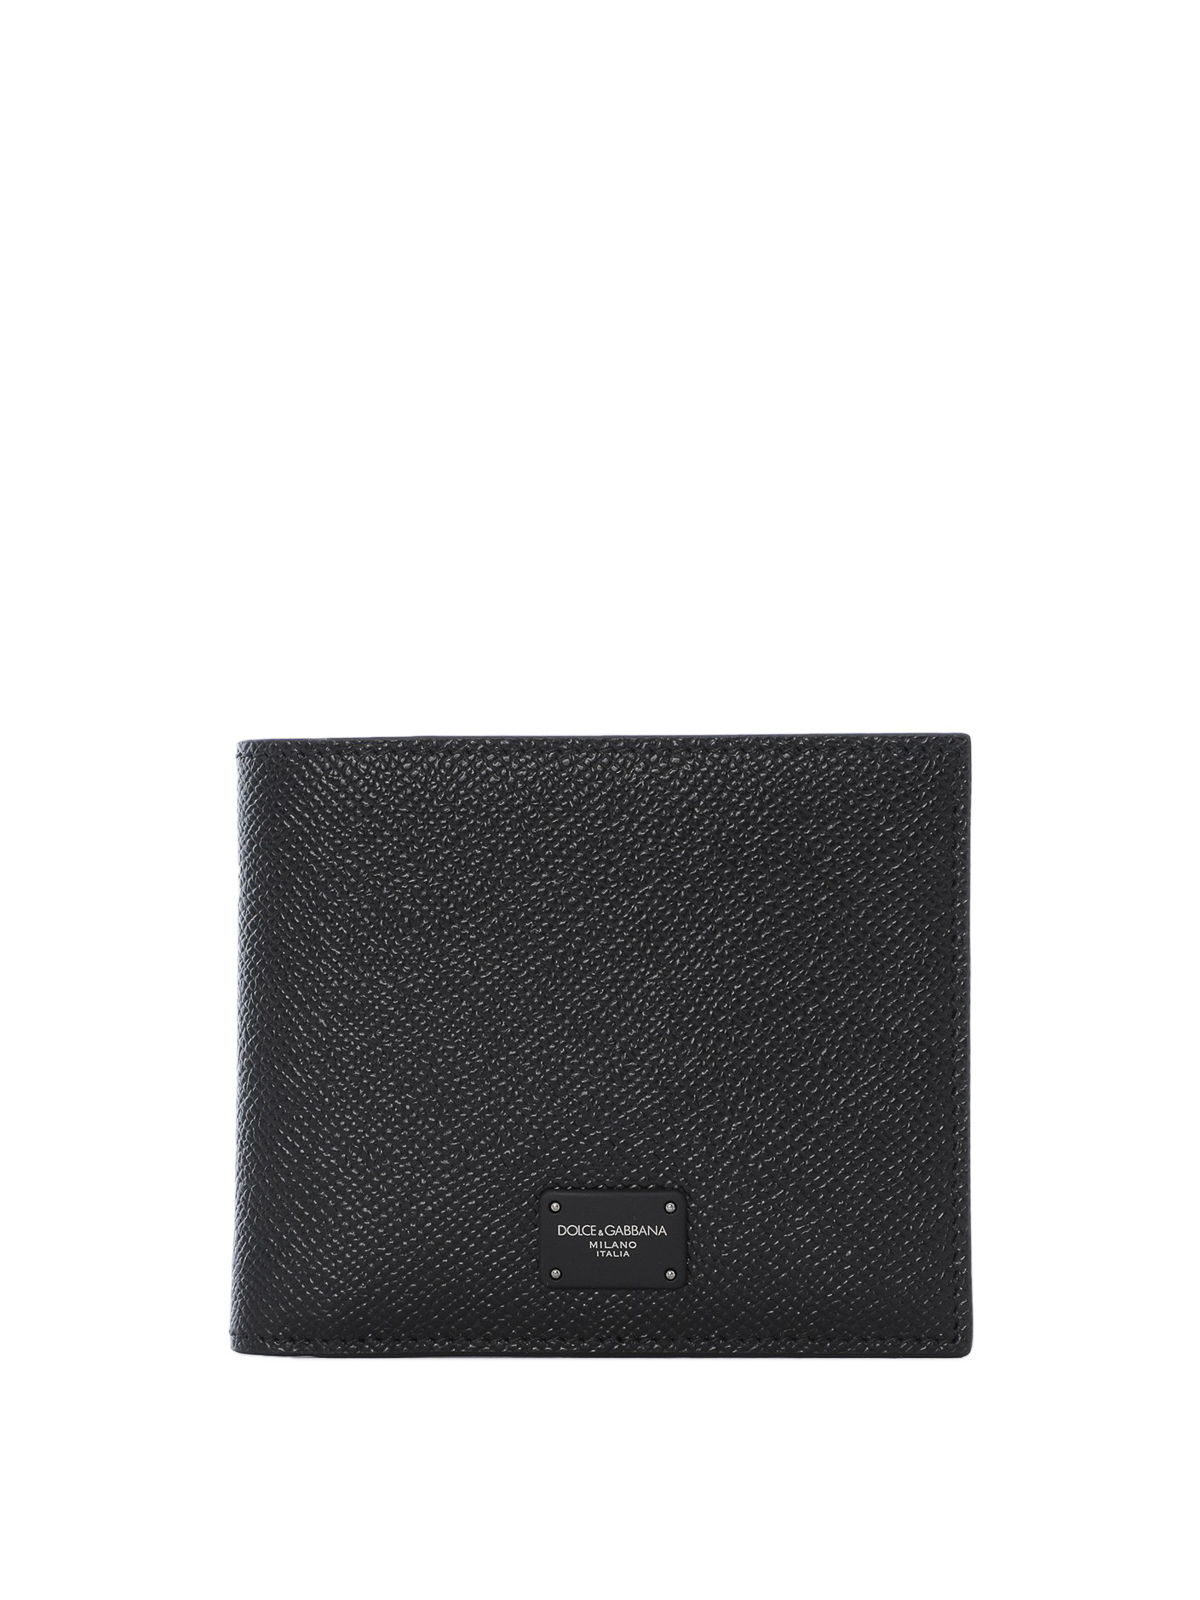 Dolce & Gabbana Black Dauphine Leather Wallet In Negro